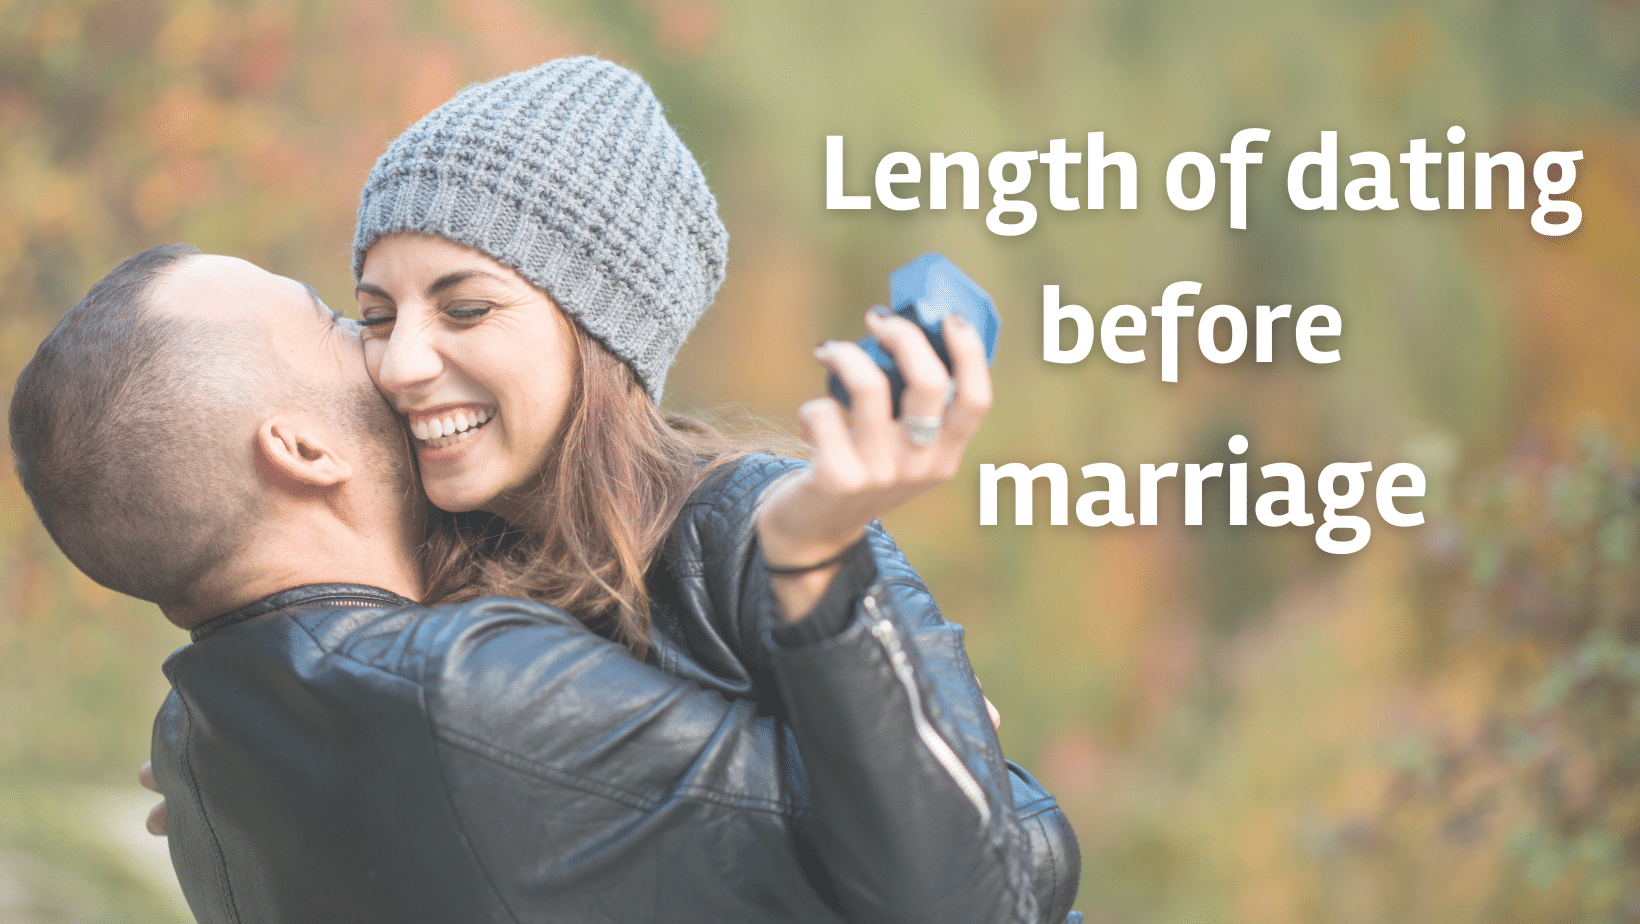 How Long To Date Before Marriage? [Statistics]